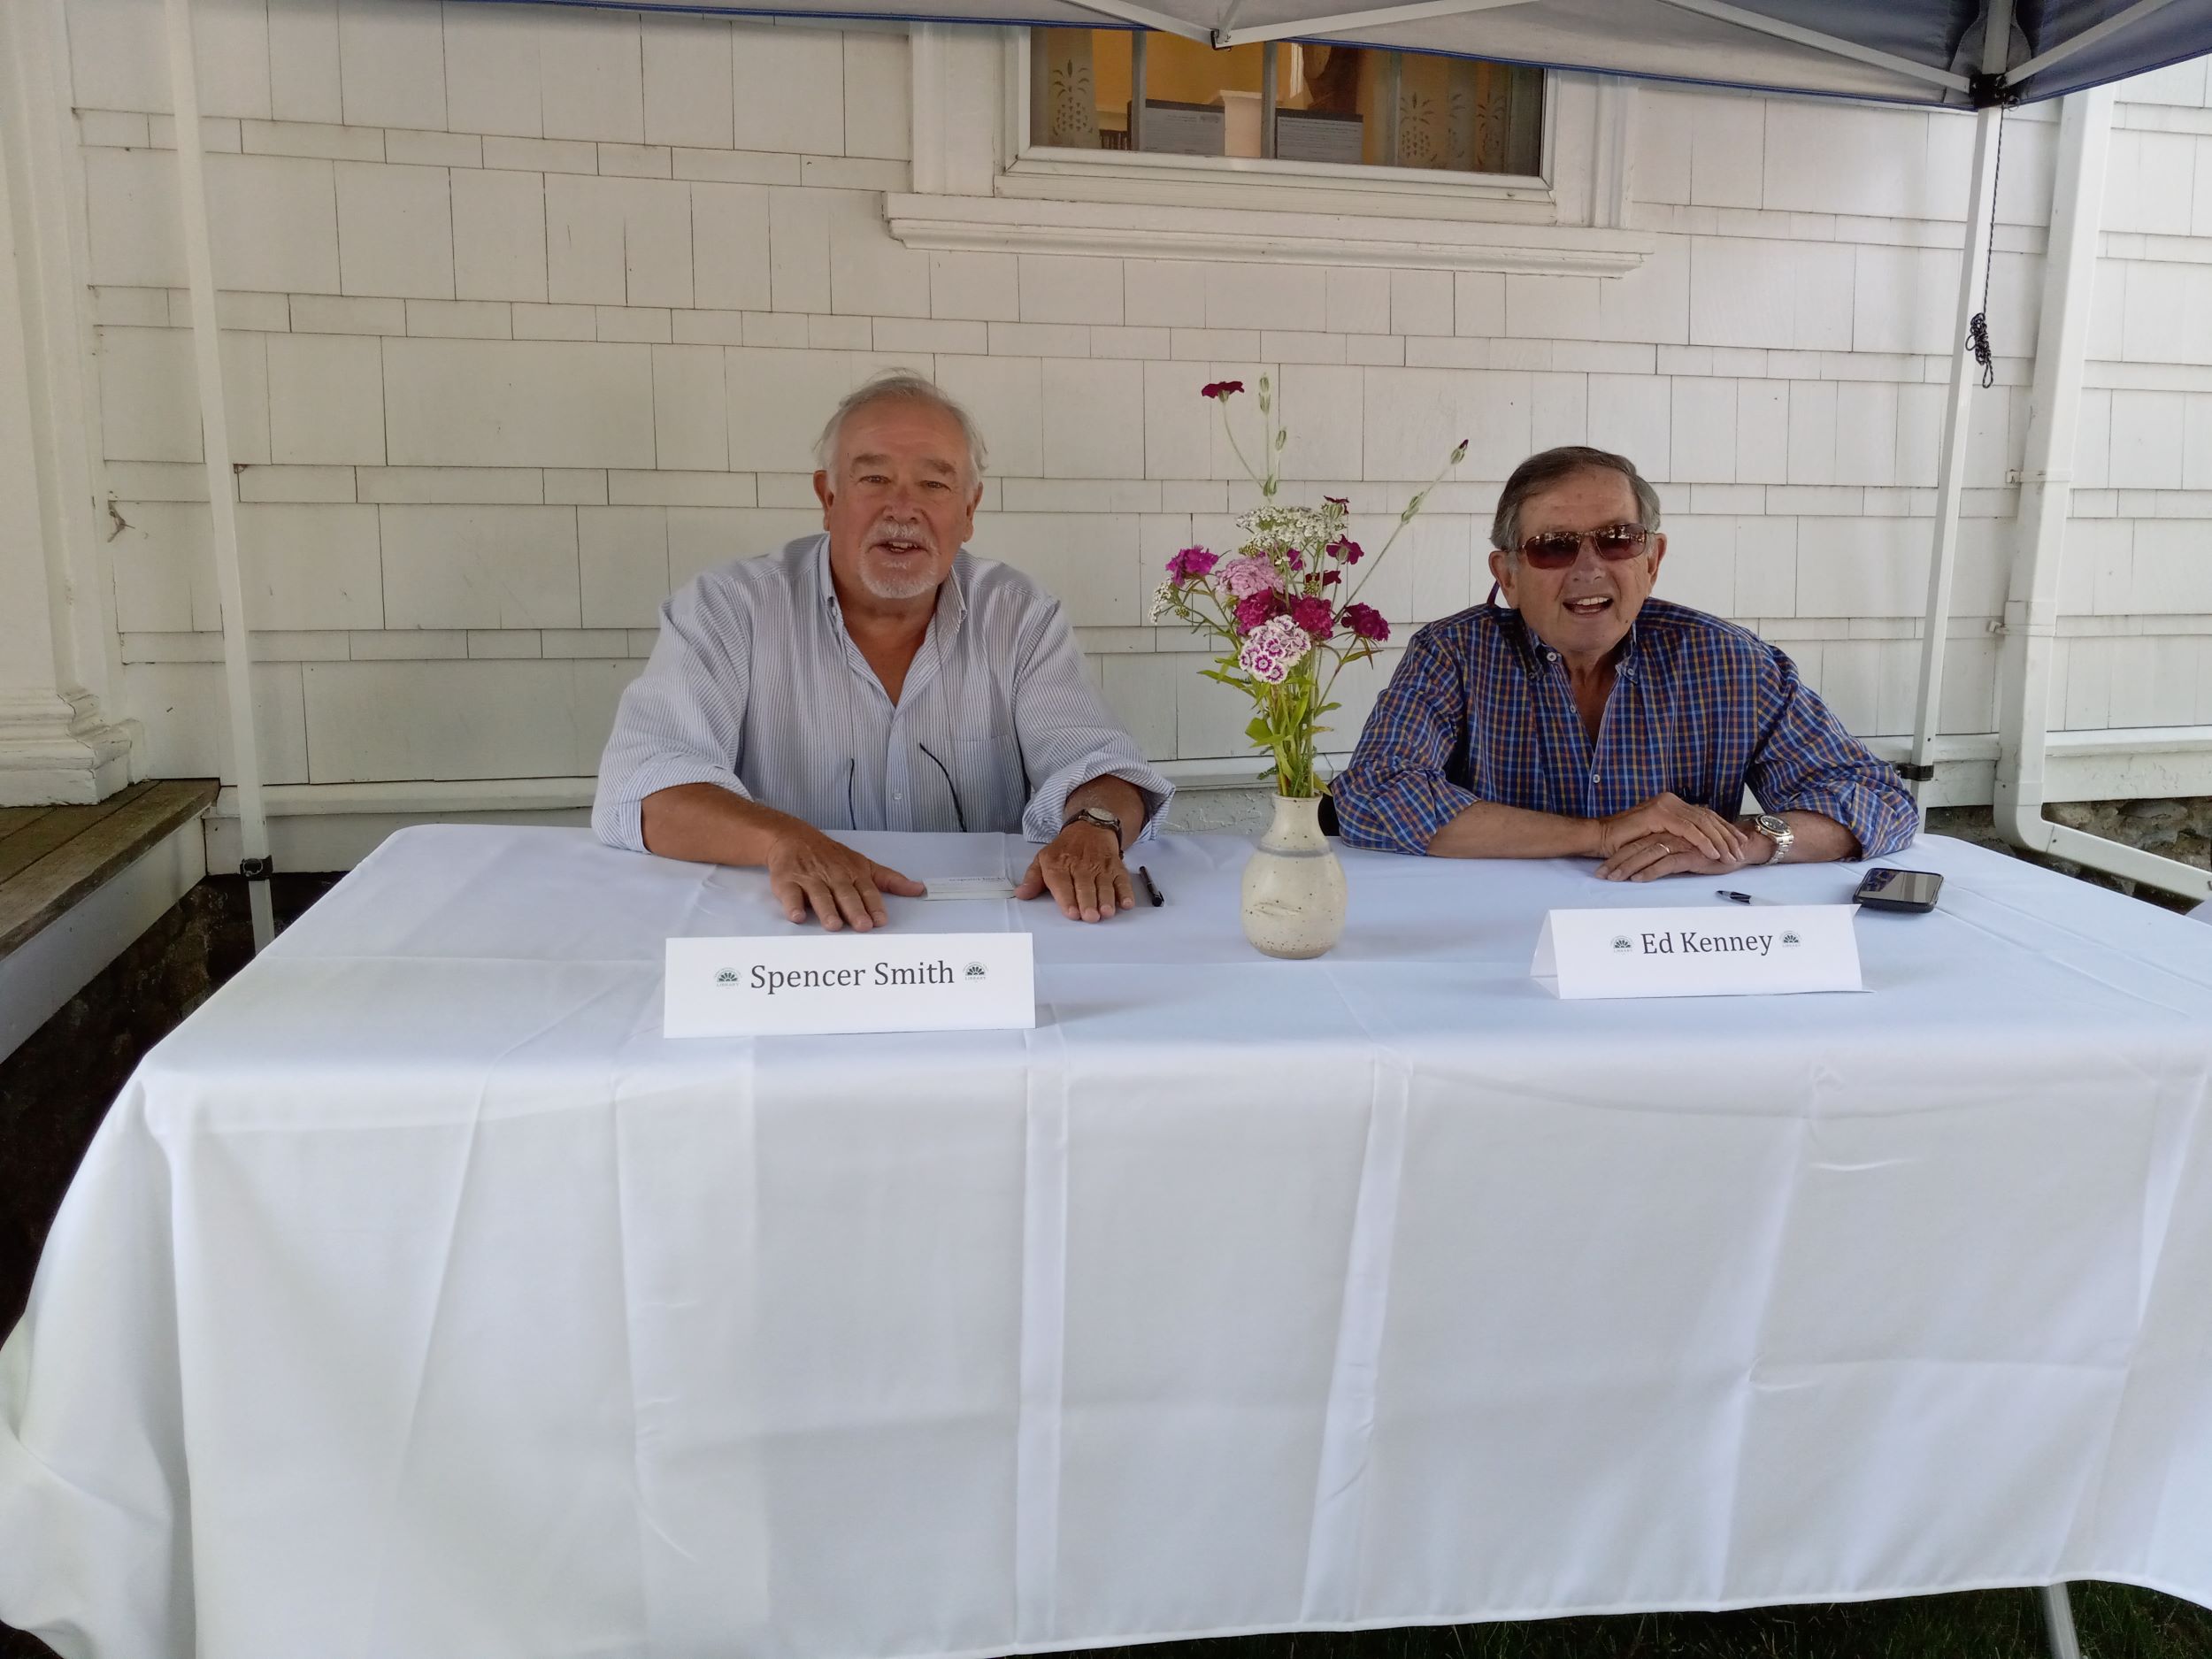 Publisher Spencer Smith sitting at white table with author Ed Kenney at an  outdoor Friend Memorial Library event